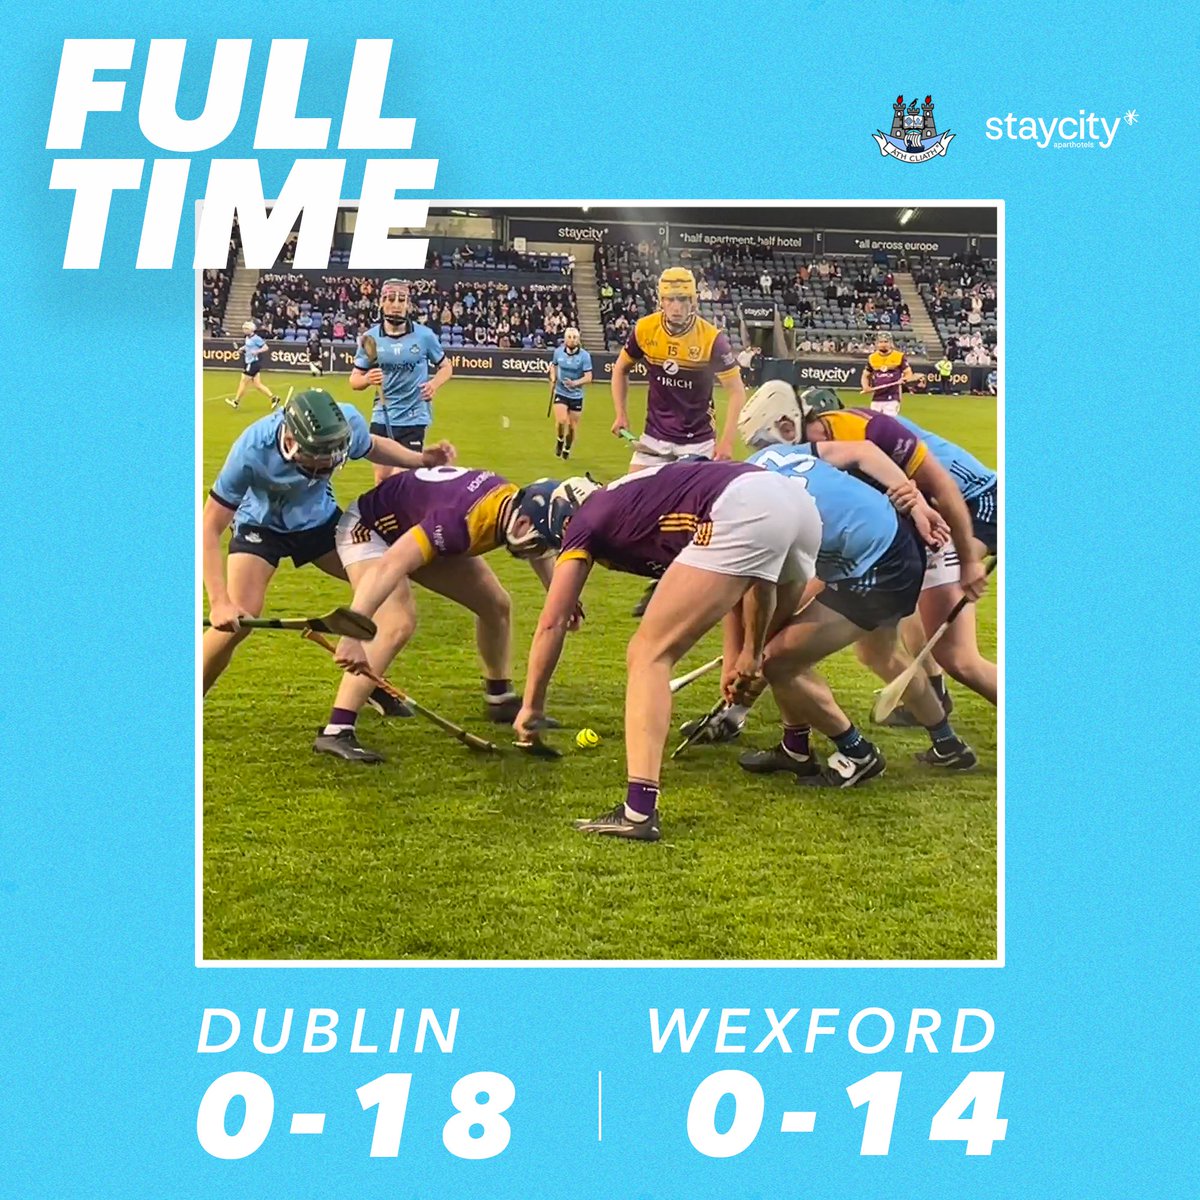 Our U20 Hurlers come out on top here at Parnell Park to progress to the Leinster Semi Final 👕🙌

#UpTheDubs